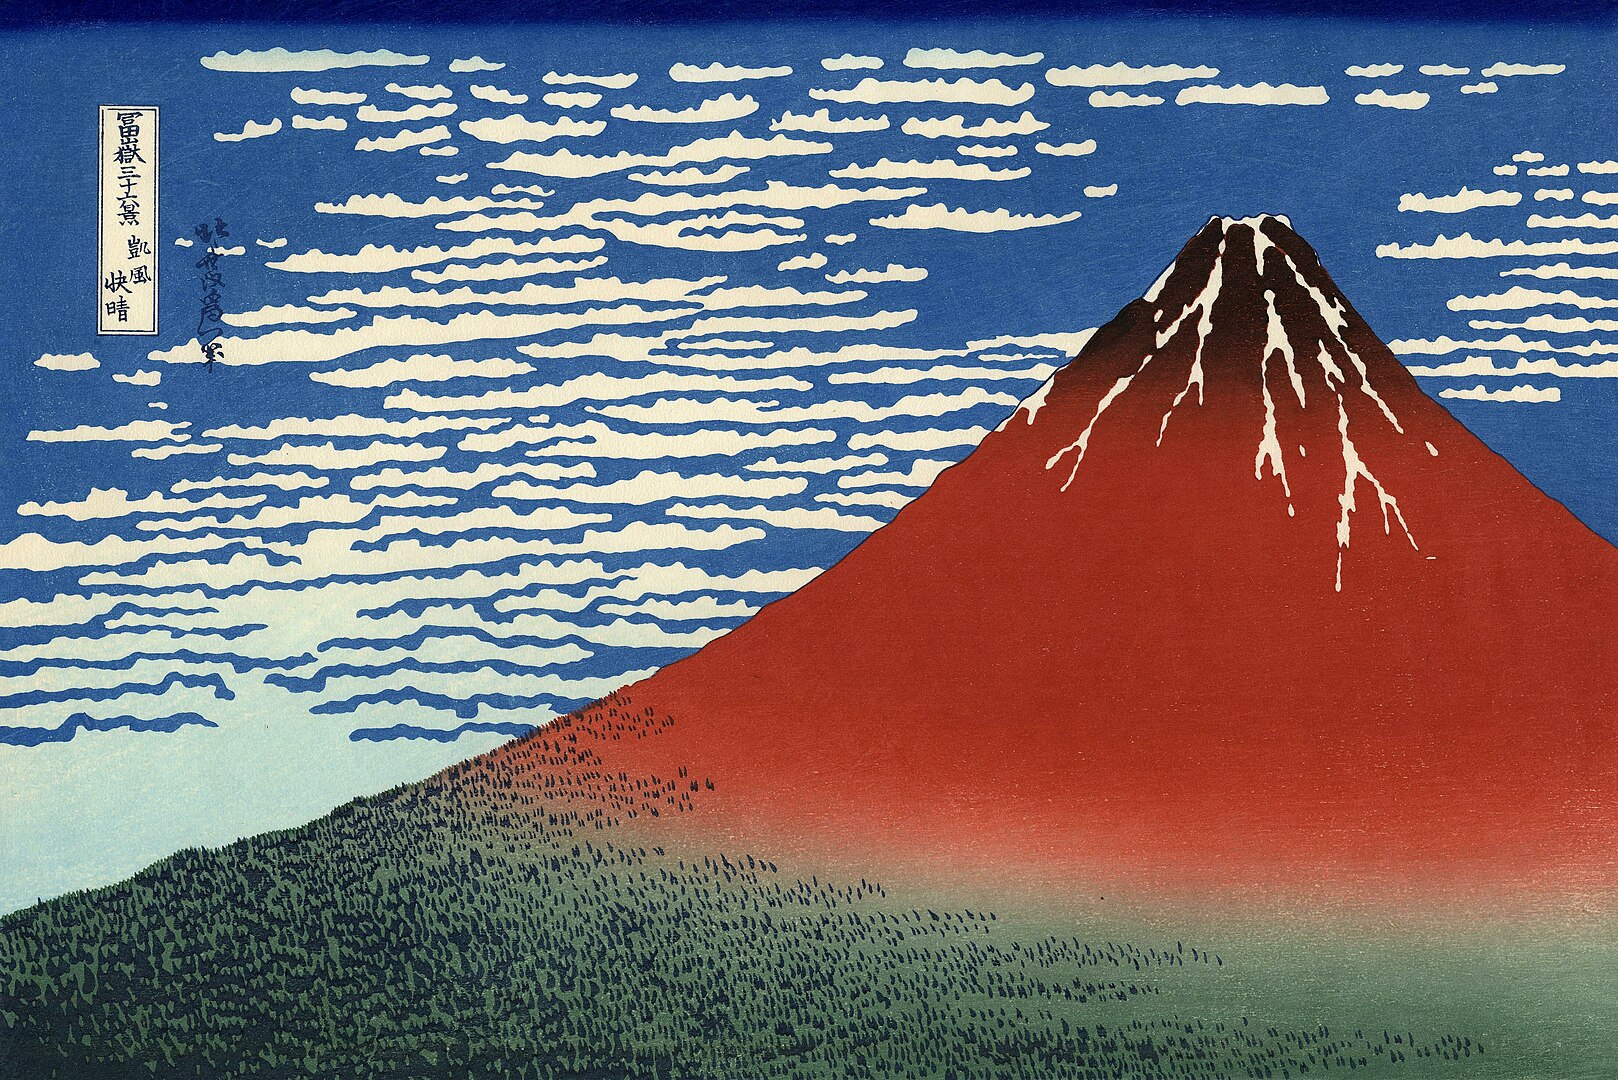 An illustration of a tall mountain against a backdrop of clouds.